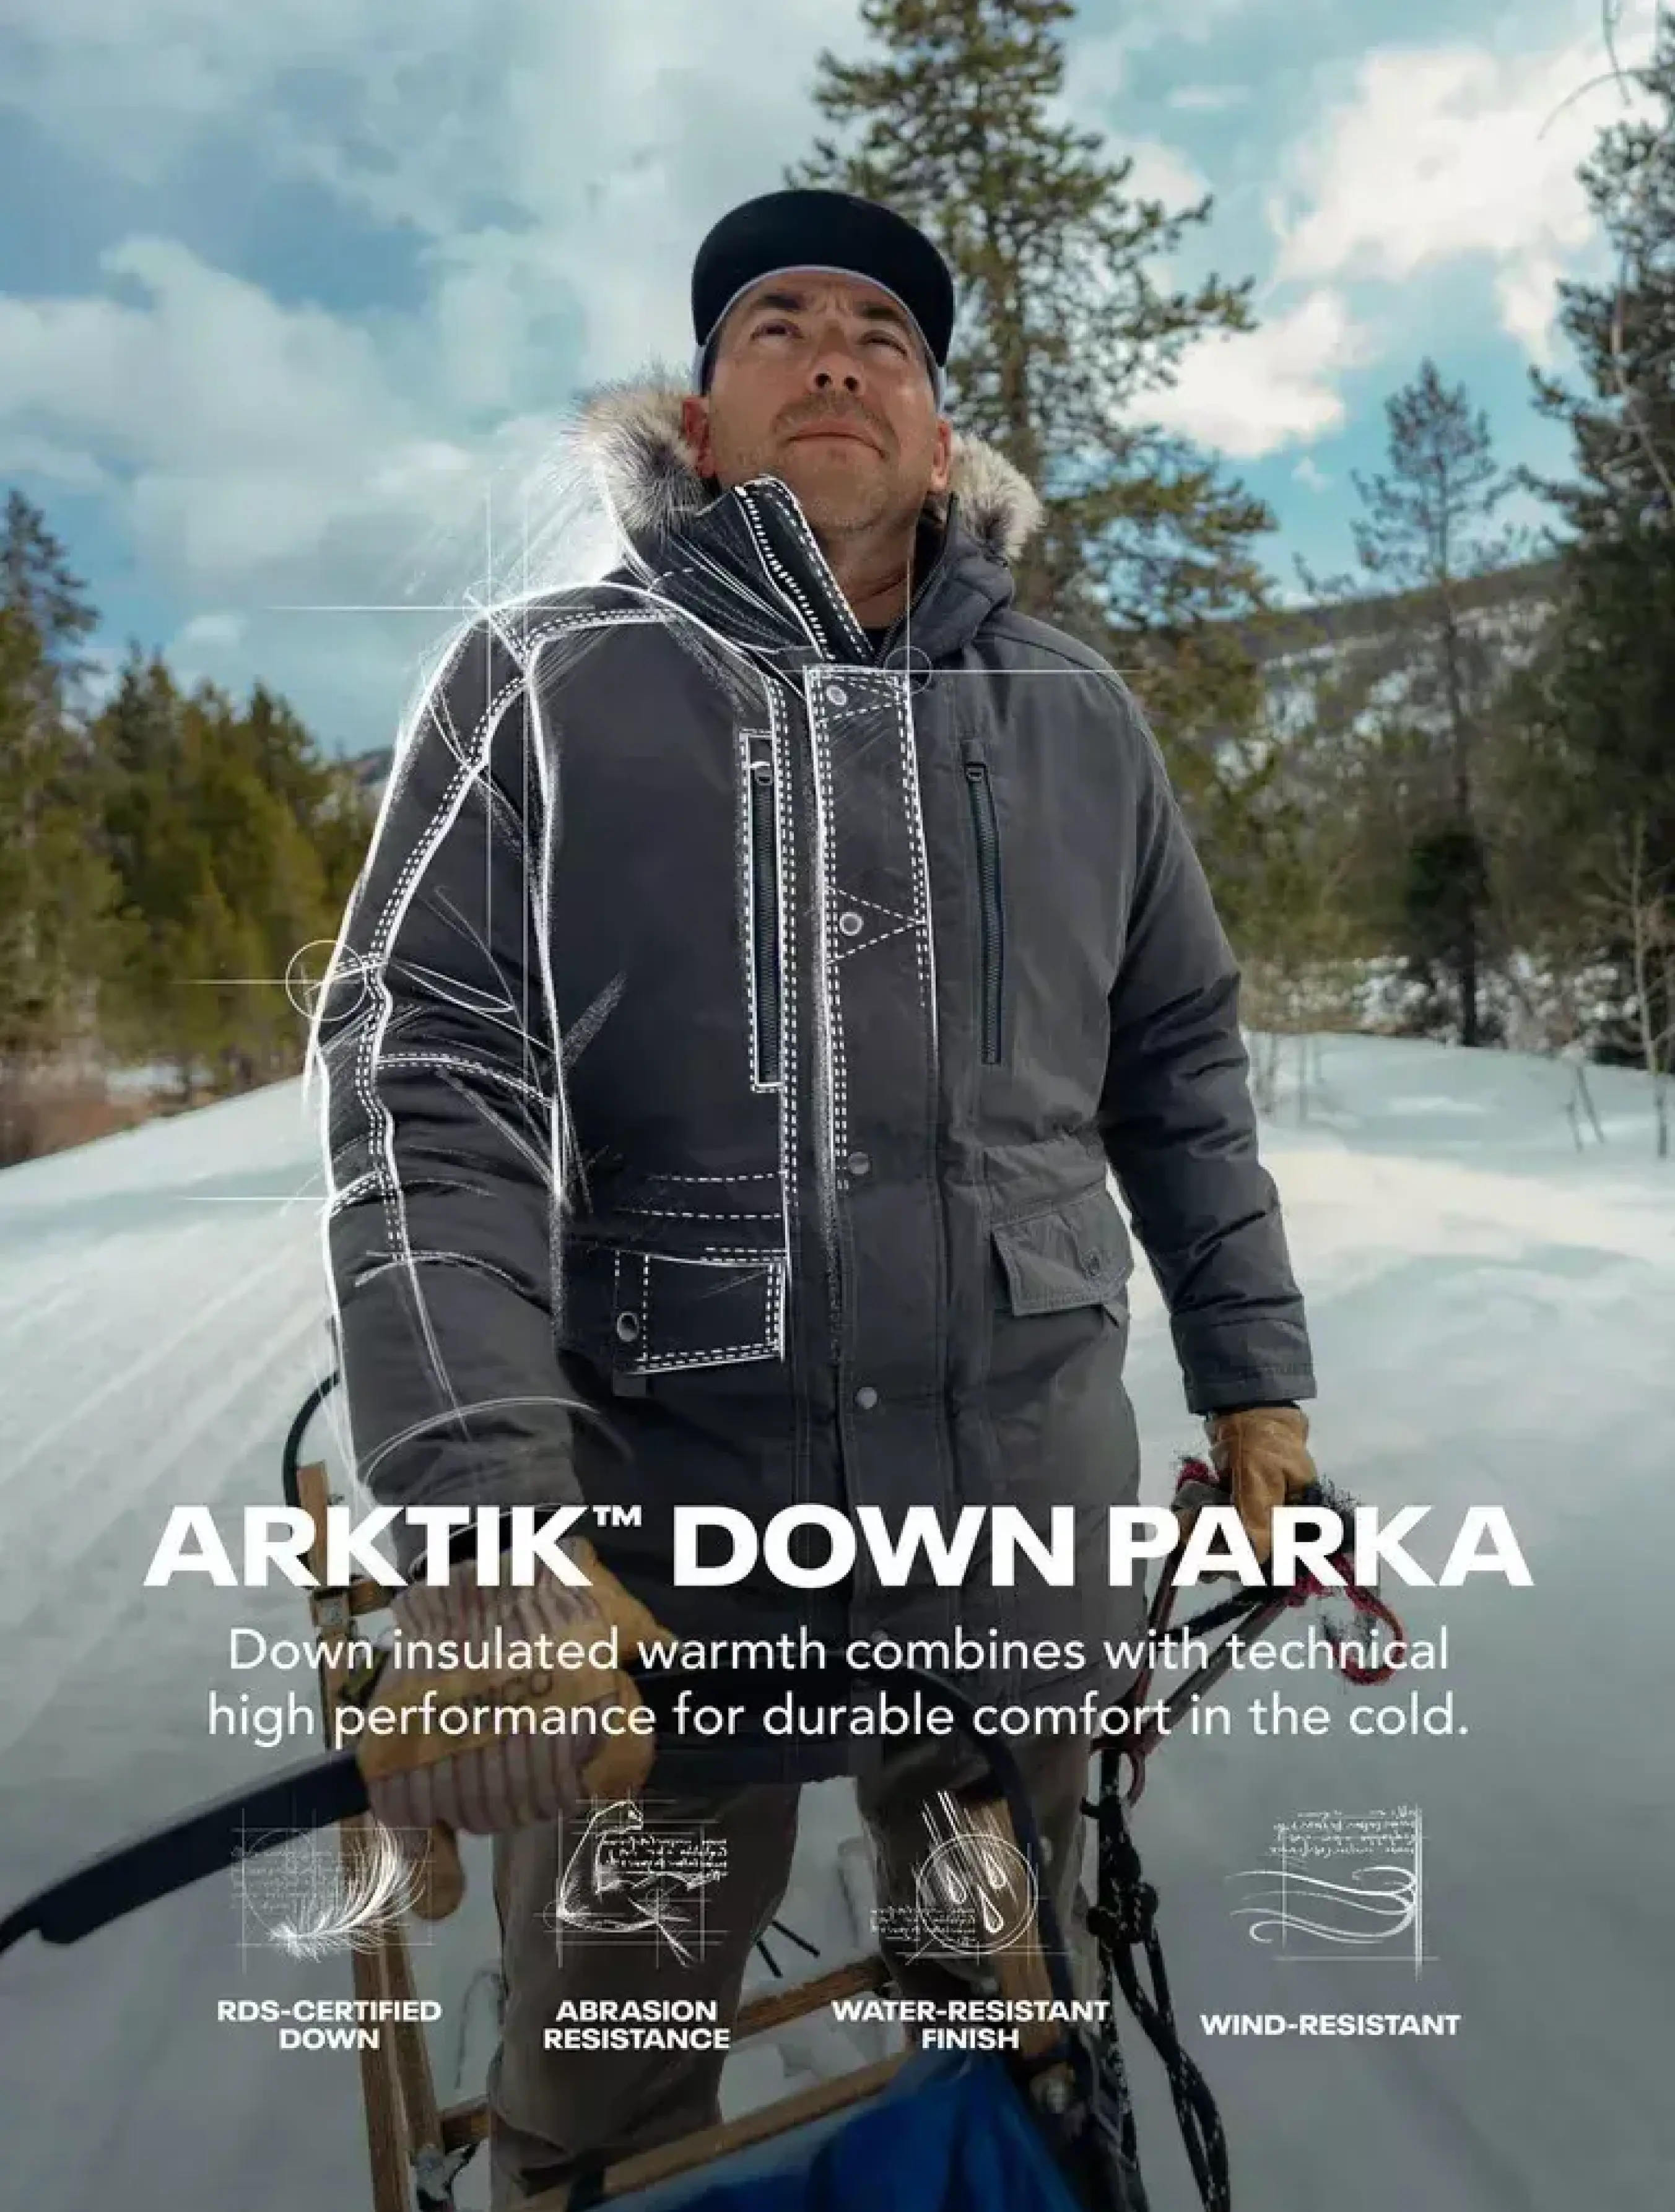 Bivouac Ann Arbor - Stay kühl (and warm) with the @kuhl Arktik Down Parka  🤙 - - - Shop the Arktik Parka and more from @kuhl in store or online  today!